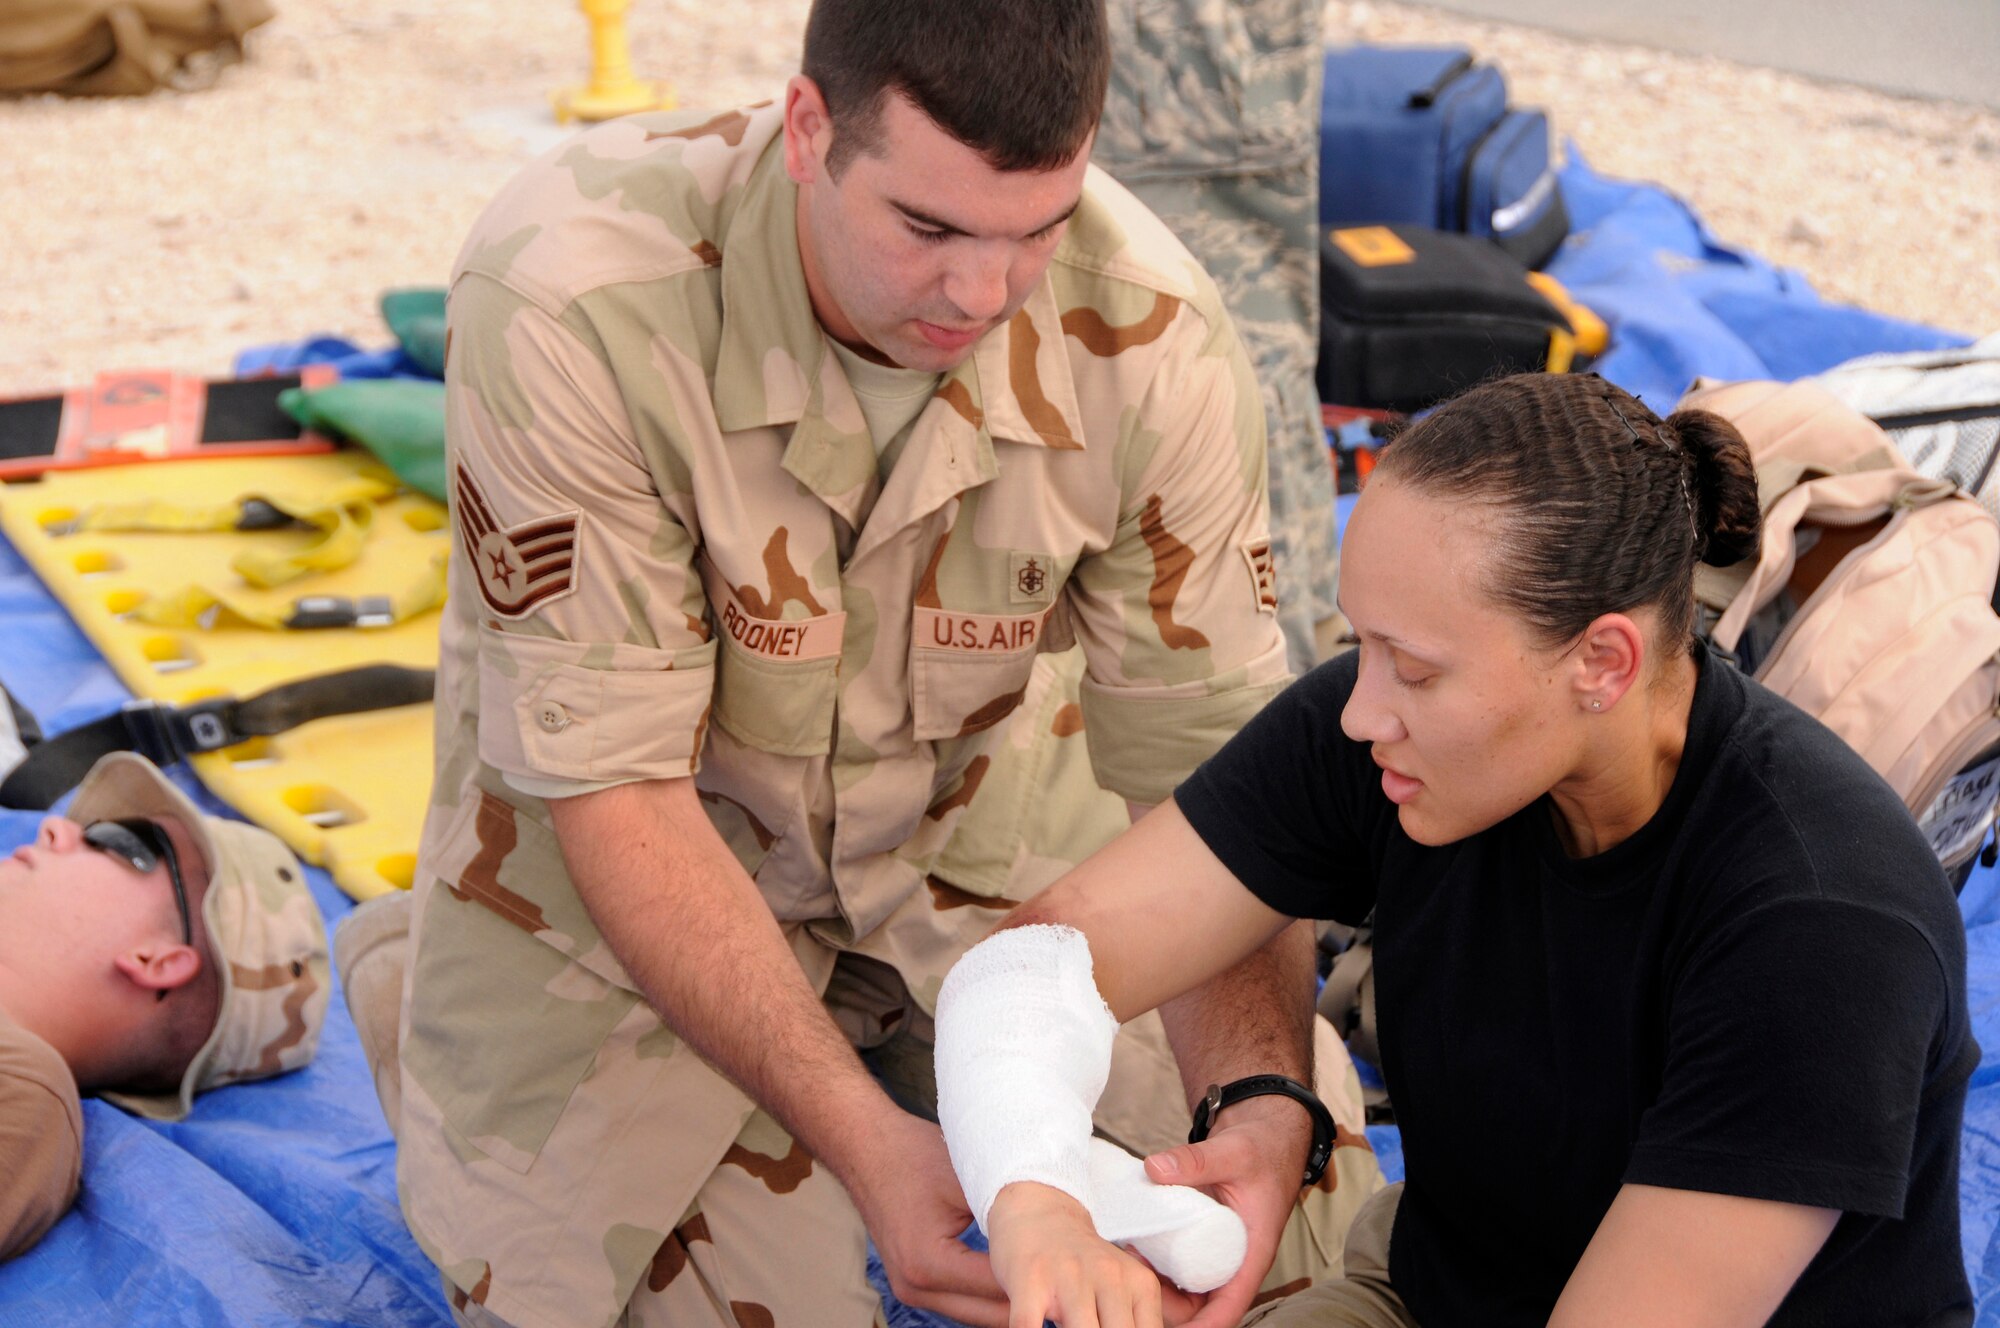 Staff Sgt. Mathew Rooney, 34th Expeditionary Bomb Squadron, an independent medical duty technician from Ellsworth Air Force Base, S.D., dresses a simulated third-degree burn on the arm of Staff Sgt. Jackie Carr, 379th Expeditionary Force Support Squadron, during a Major Accident Response Exercise in Southwest Asia July 28.  The objective was to test key personnels' response to a major accident.  Emphasized areas were emergency response operations, accountability of personnel, mortuary services and higher headquarters reporting procedures. Sergeant Carr is deployed from Davis-Monthan Air Force Base, Ariz. (U.S. Air Force photo by Tech. Sgt. Michael Boquette)